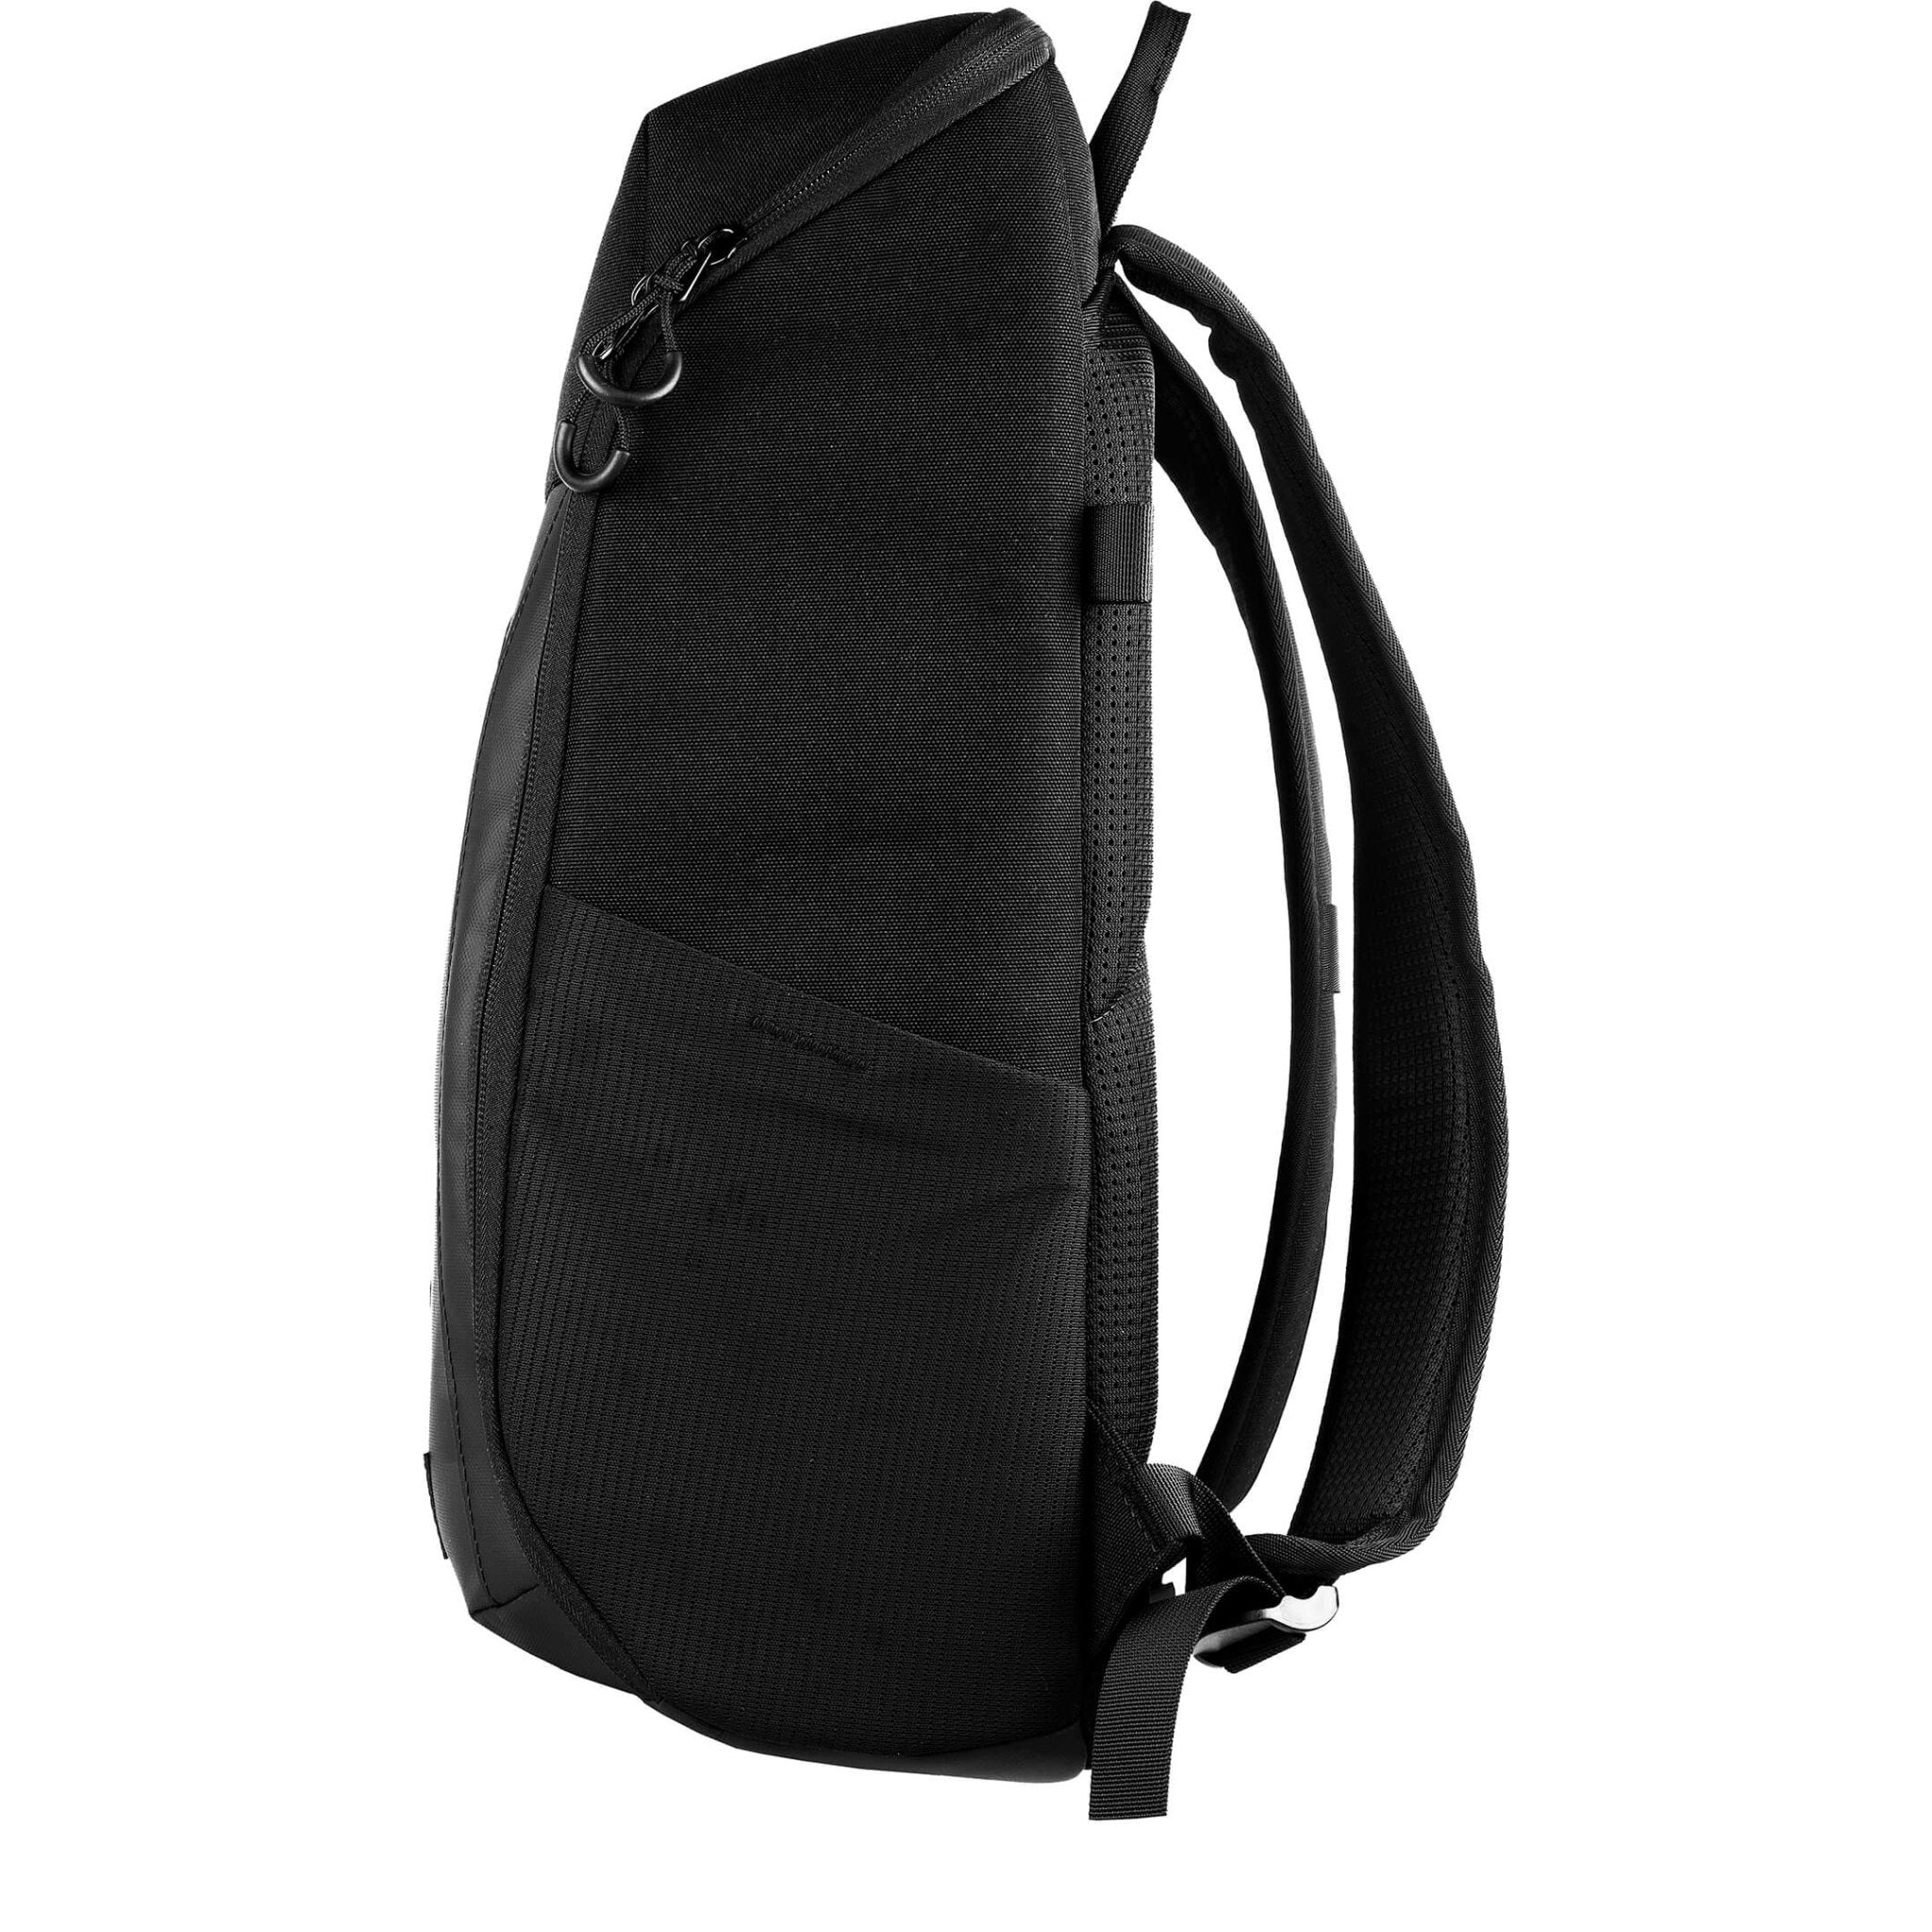 Torvol Urban Backpack - The Ultimate Daily Backpack 3 - Torvol - Drone Authority